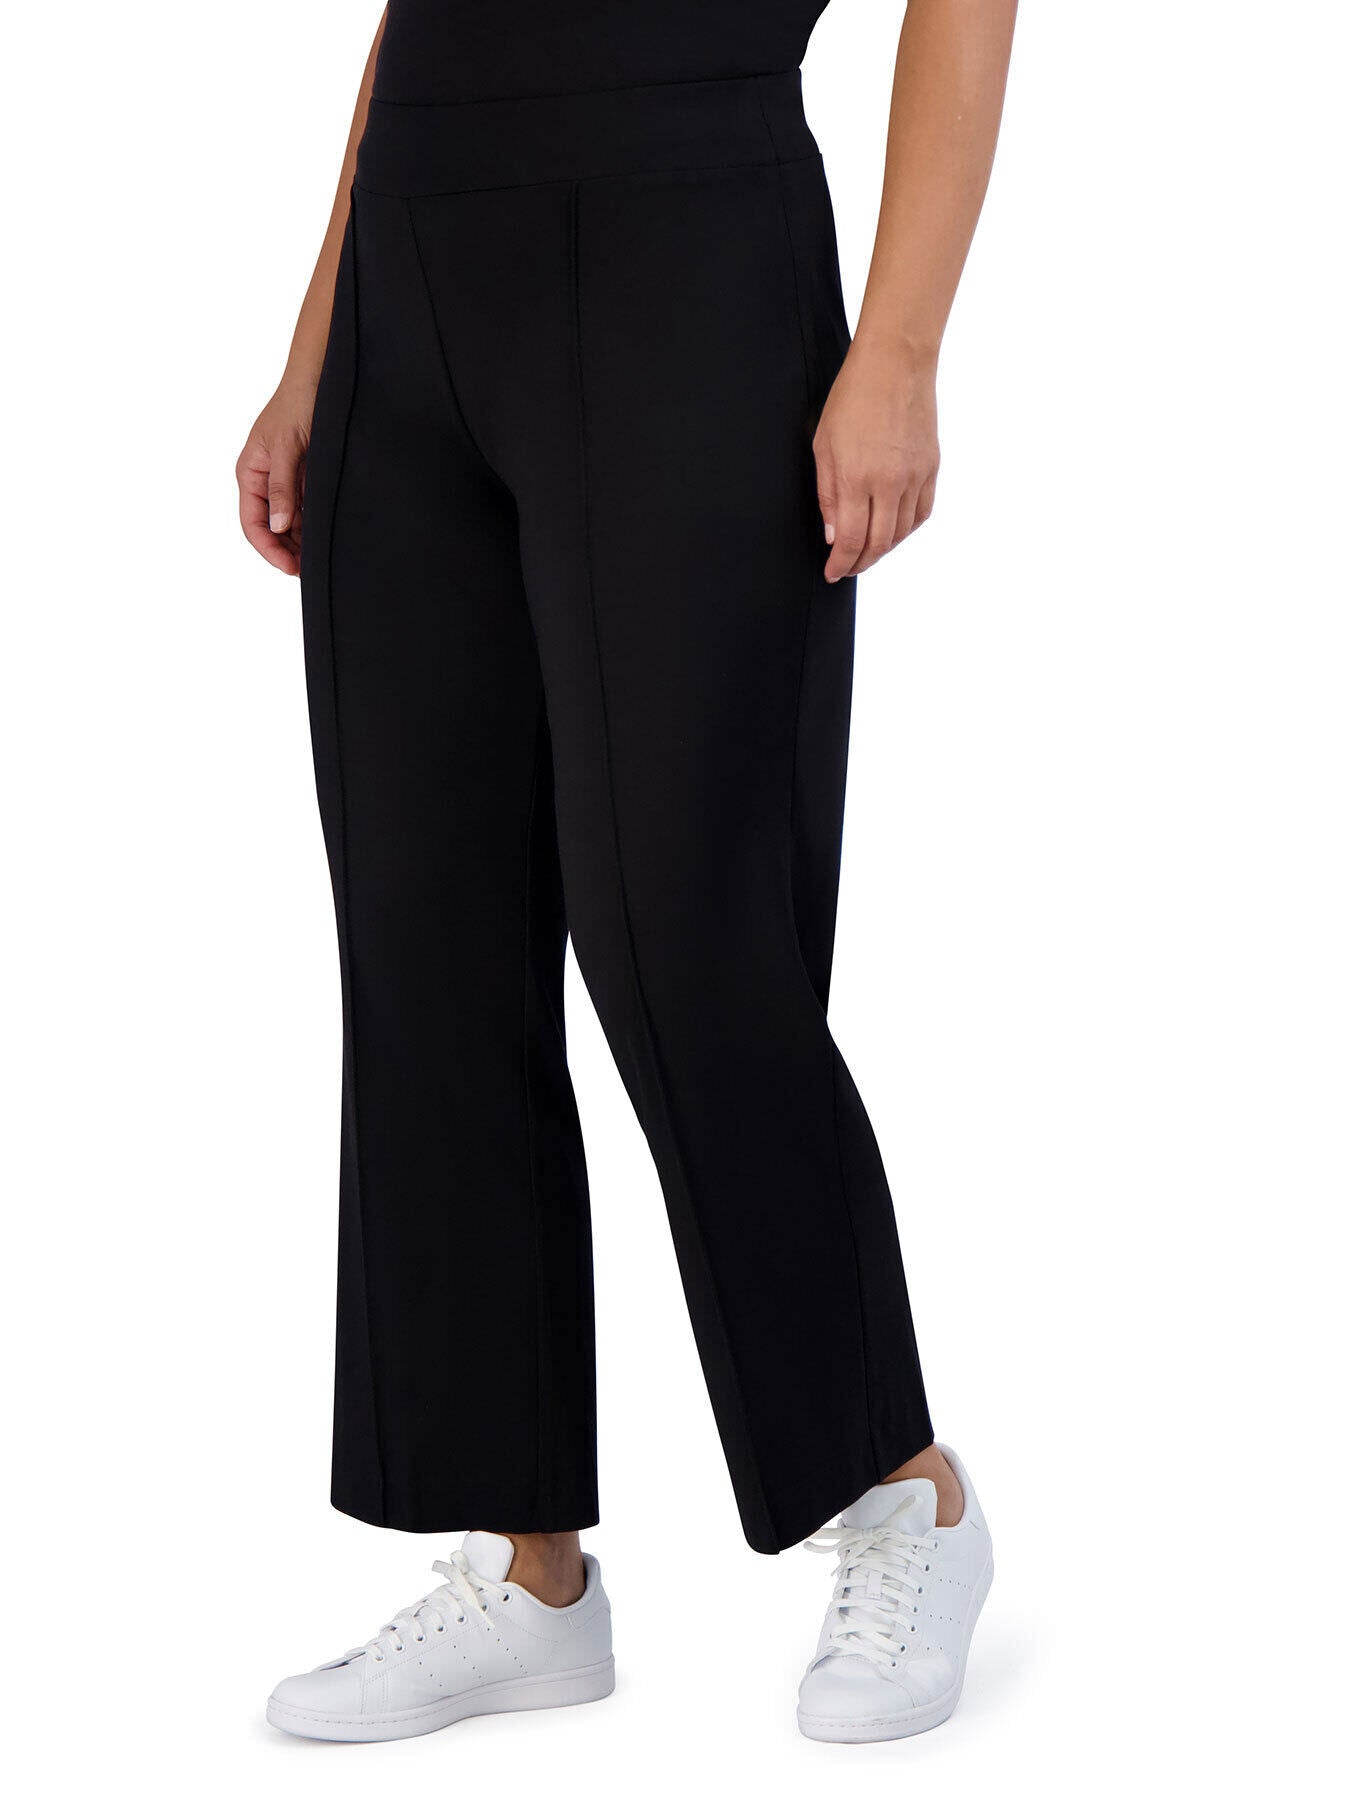 Athletic Works Knit Casual Pants for Women